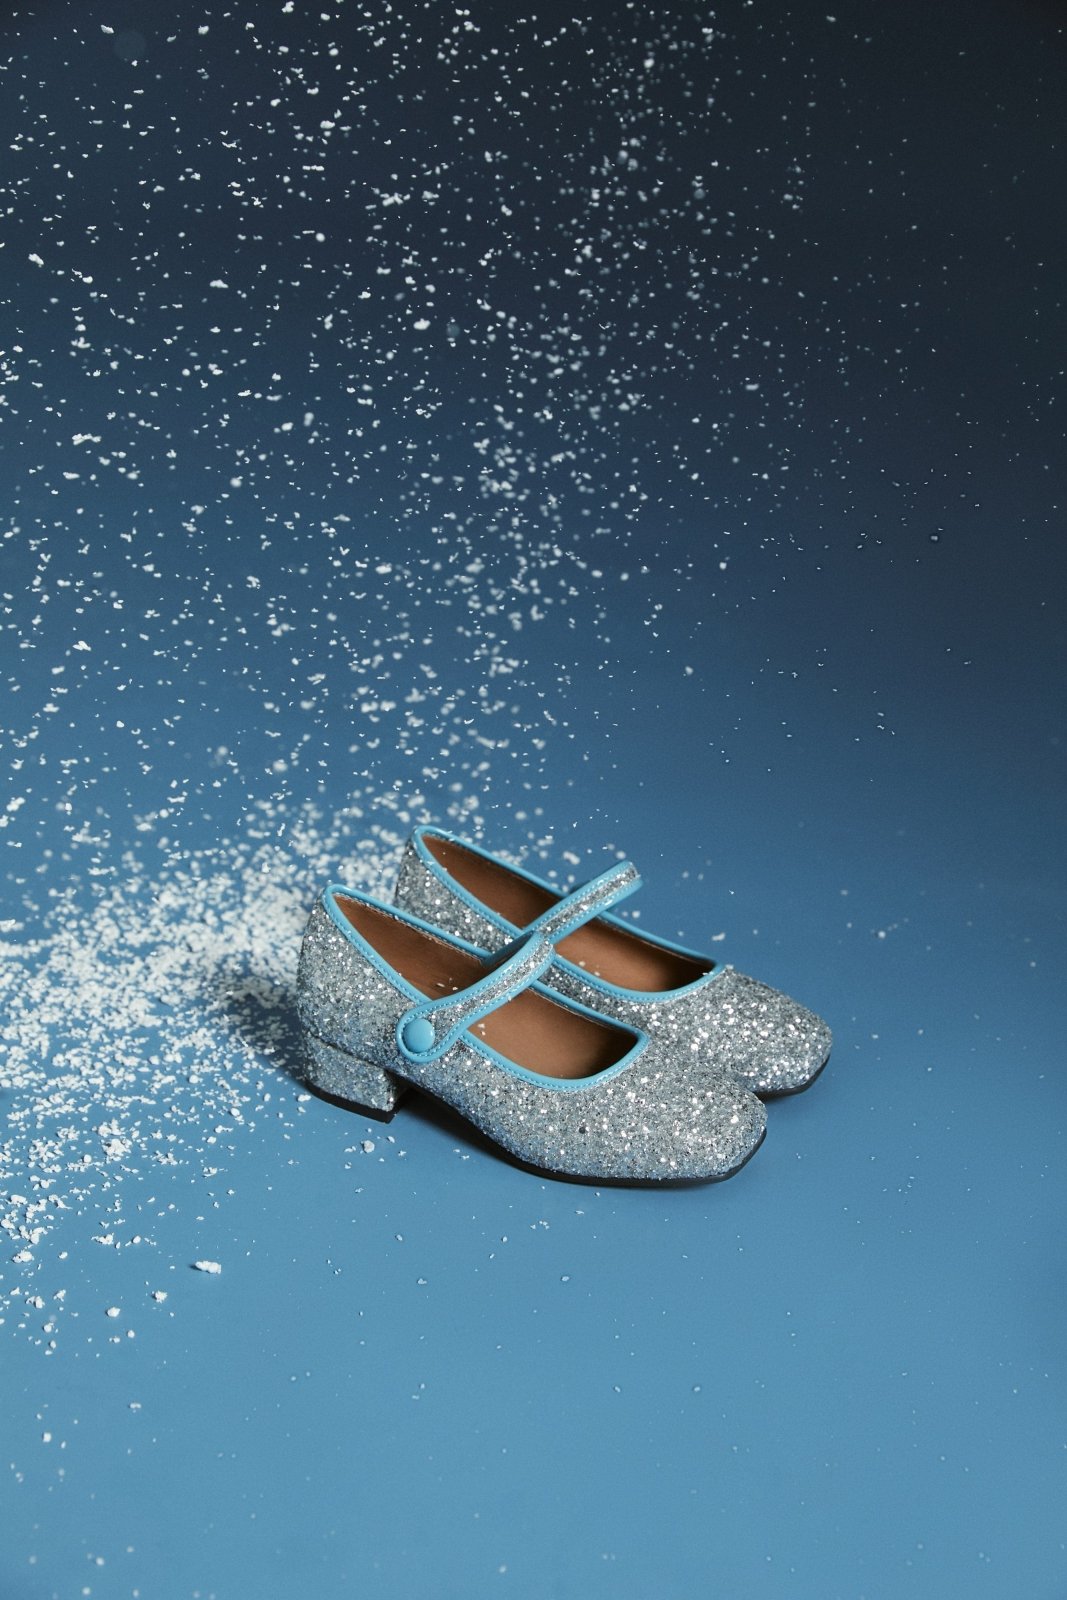 Agnese 2.0 Silver/Blue Shoes by Age of Innocence